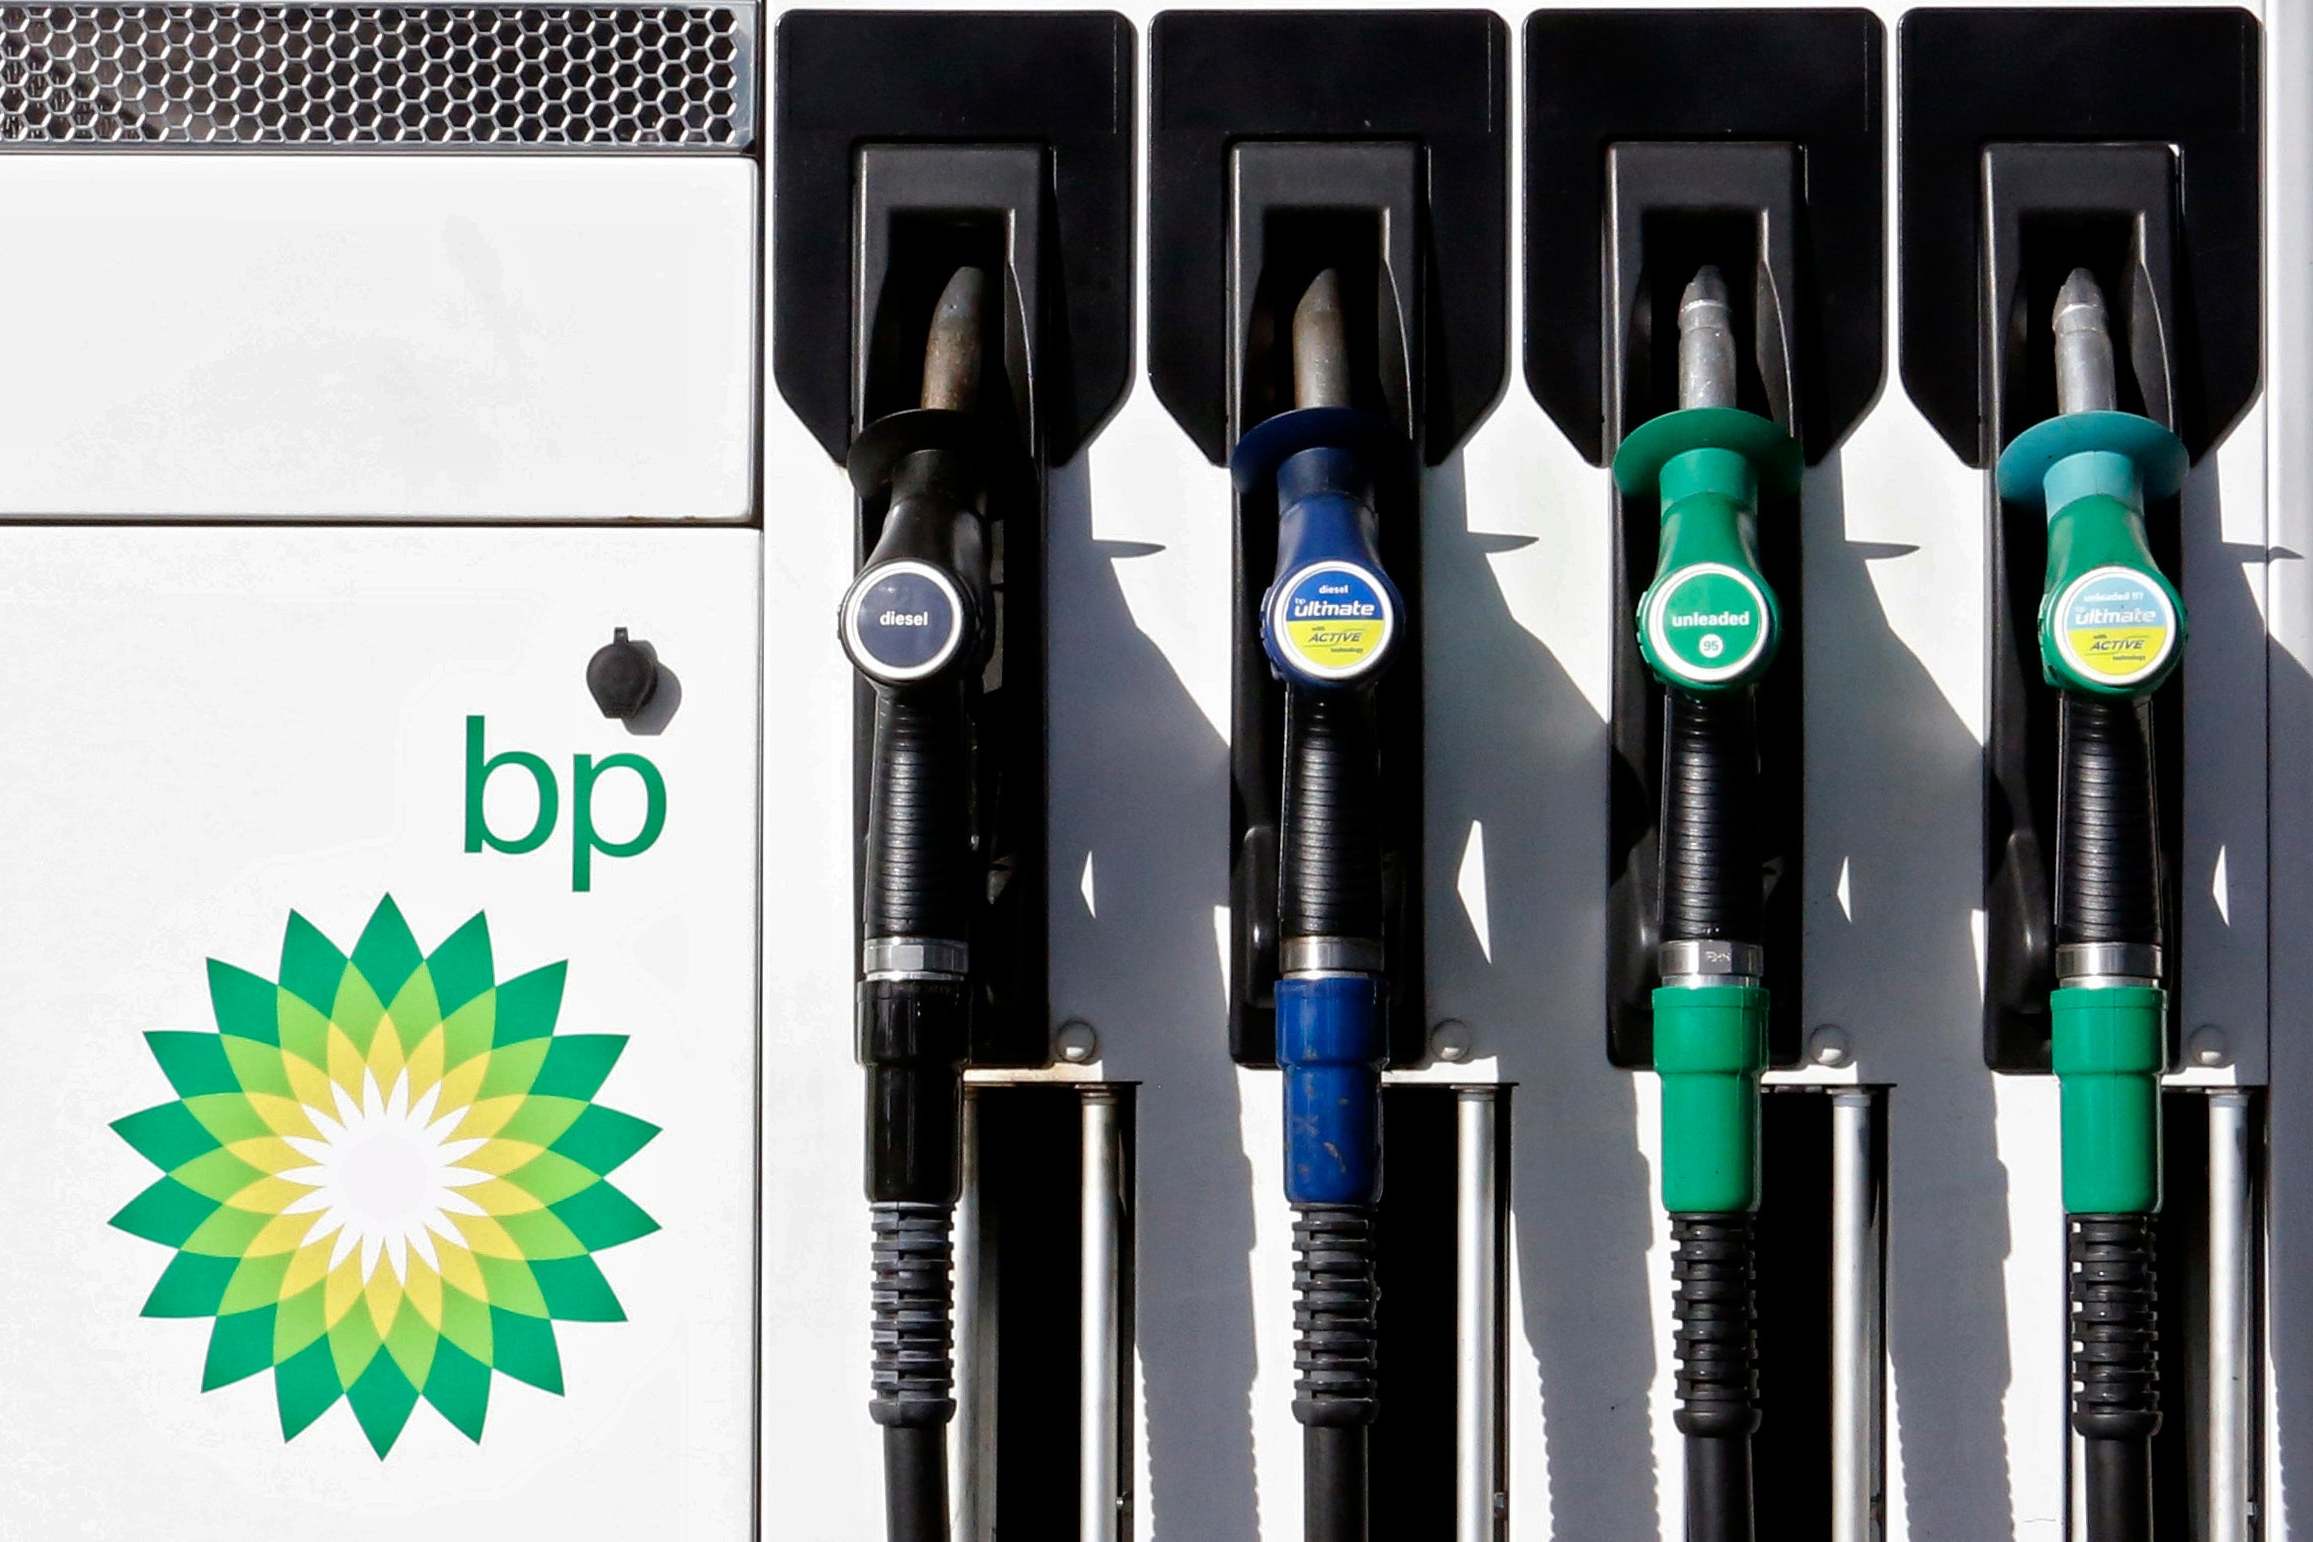 BP plans to invest up to $70bn (£53.2bn) in its fossil fuel and non-renewable energy operations over the coming half-decade